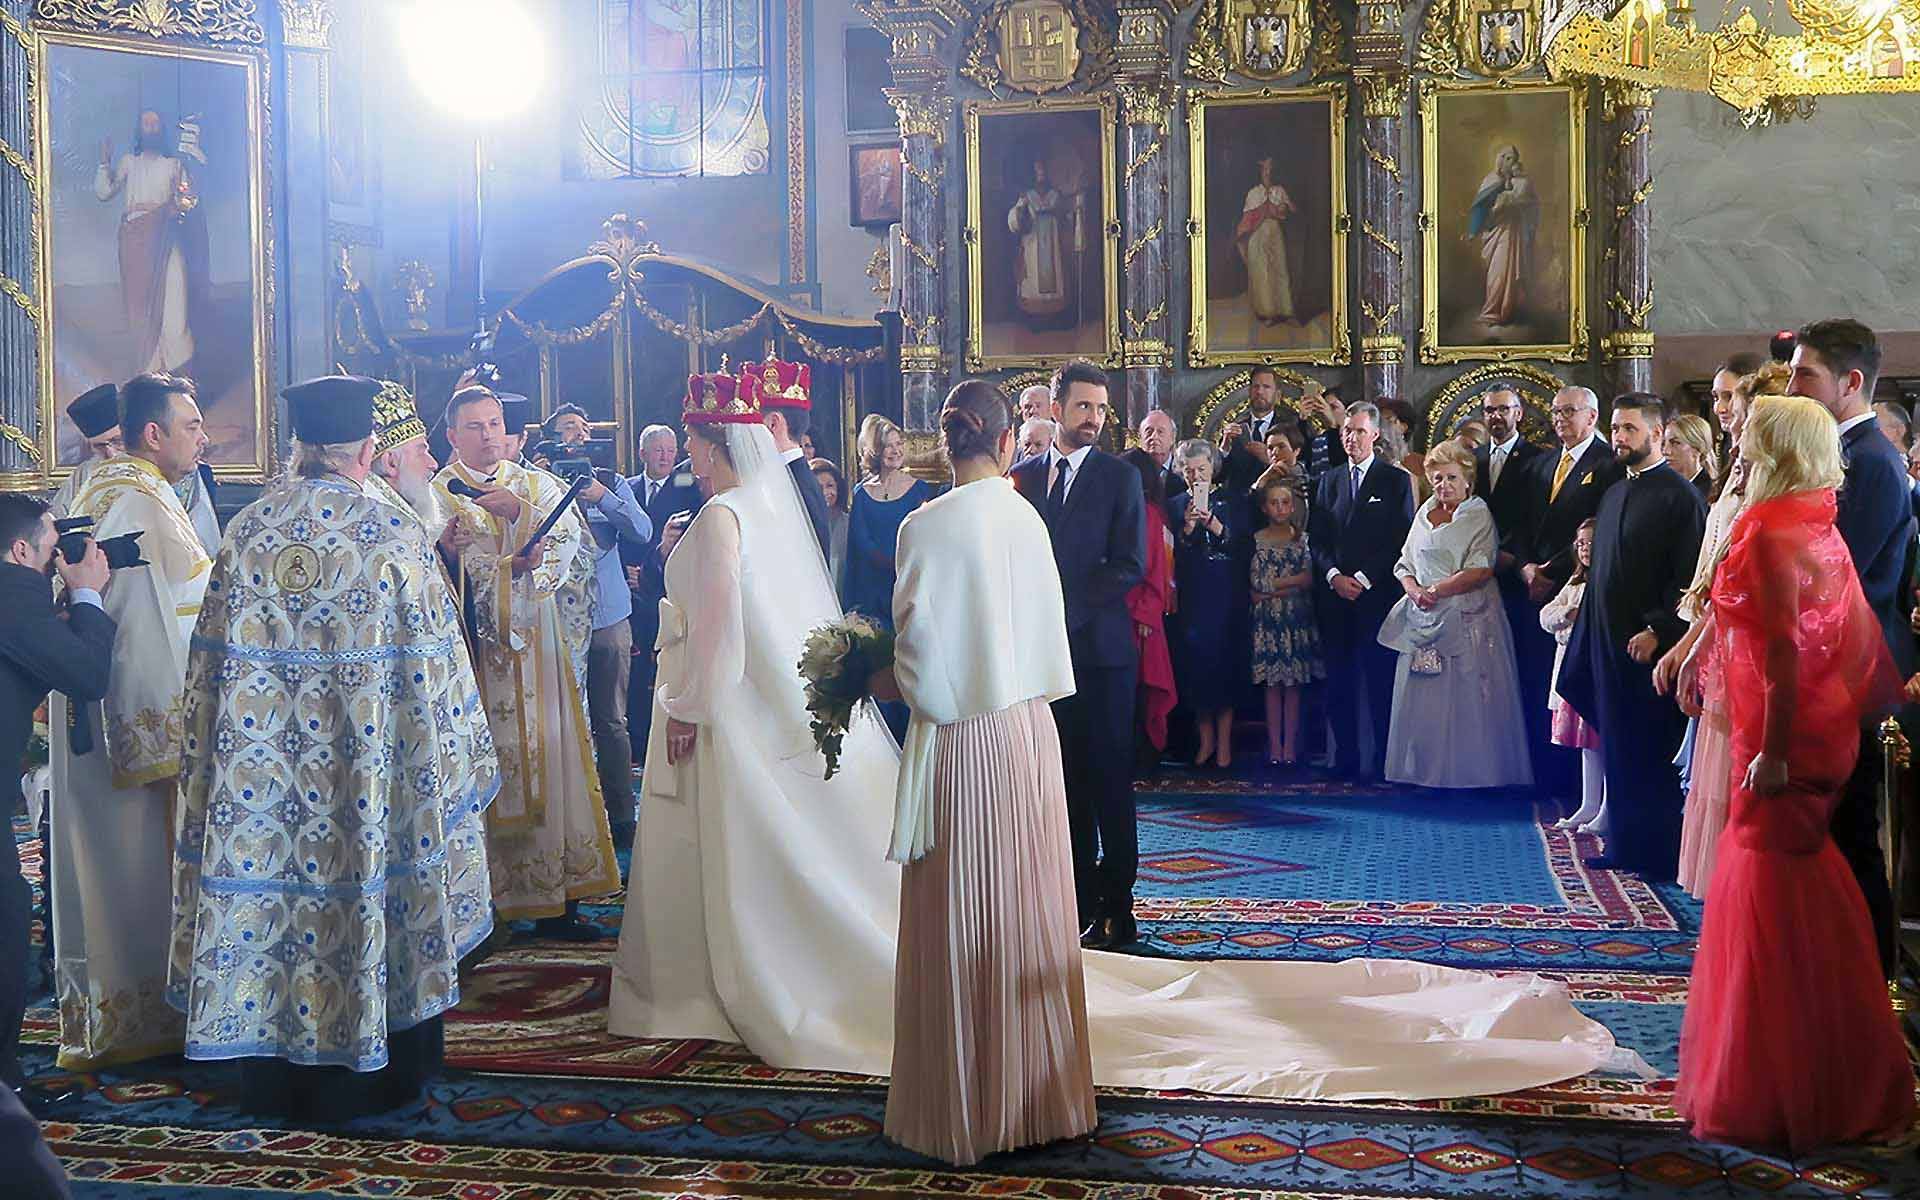 A-Royal-Wedding-of-HRH-Prince-Philip-and-Princess-Danica-in-Belgrade.-Our-Participation-was-an-honor